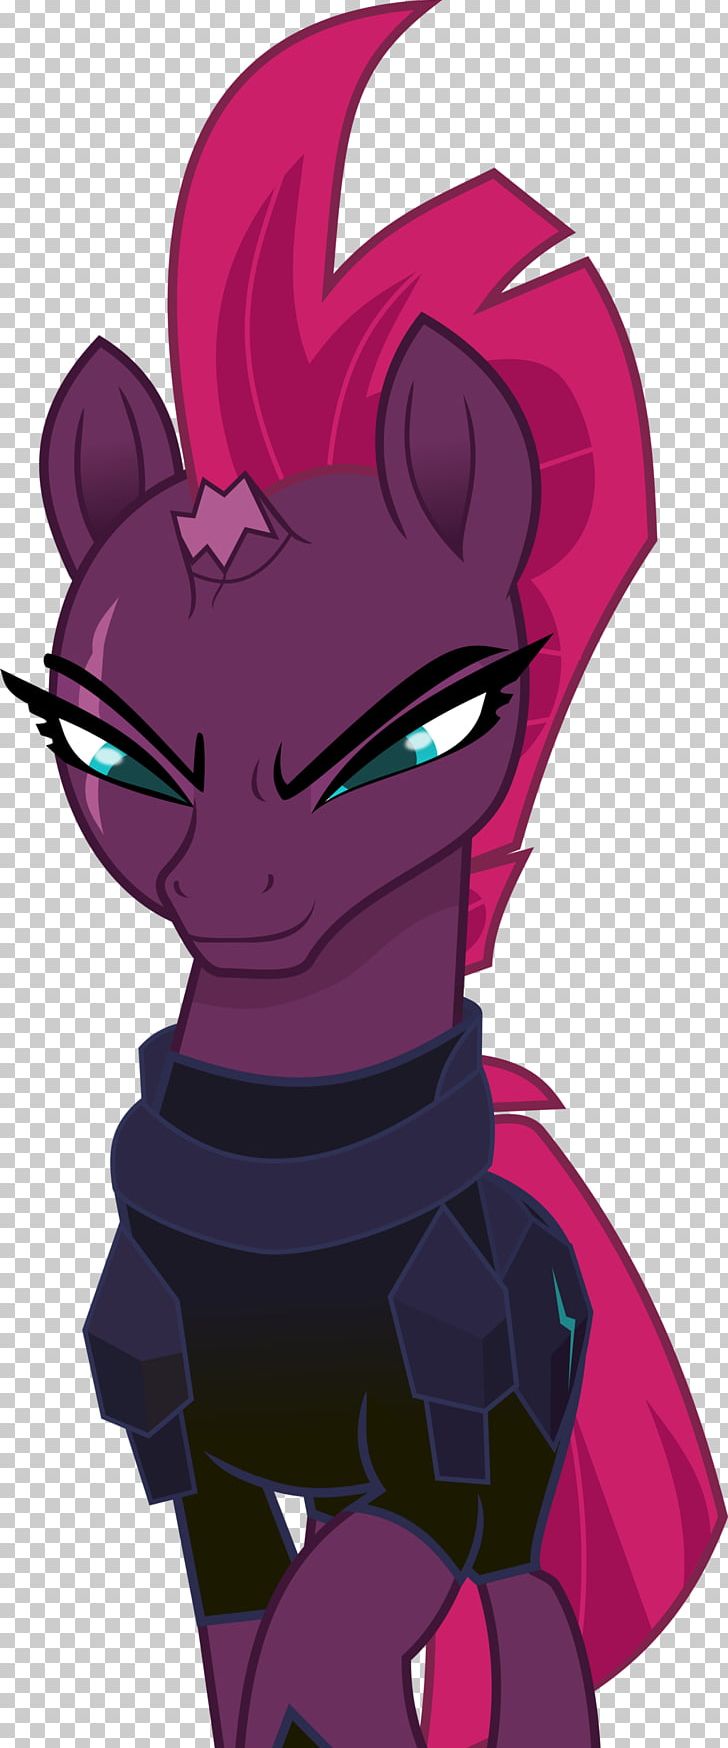 Twilight Sparkle Tempest Shadow Pony The Storm King PNG, Clipart, Art, Cartoon, Demon, Deviantart, Emily Blunt Free PNG Download